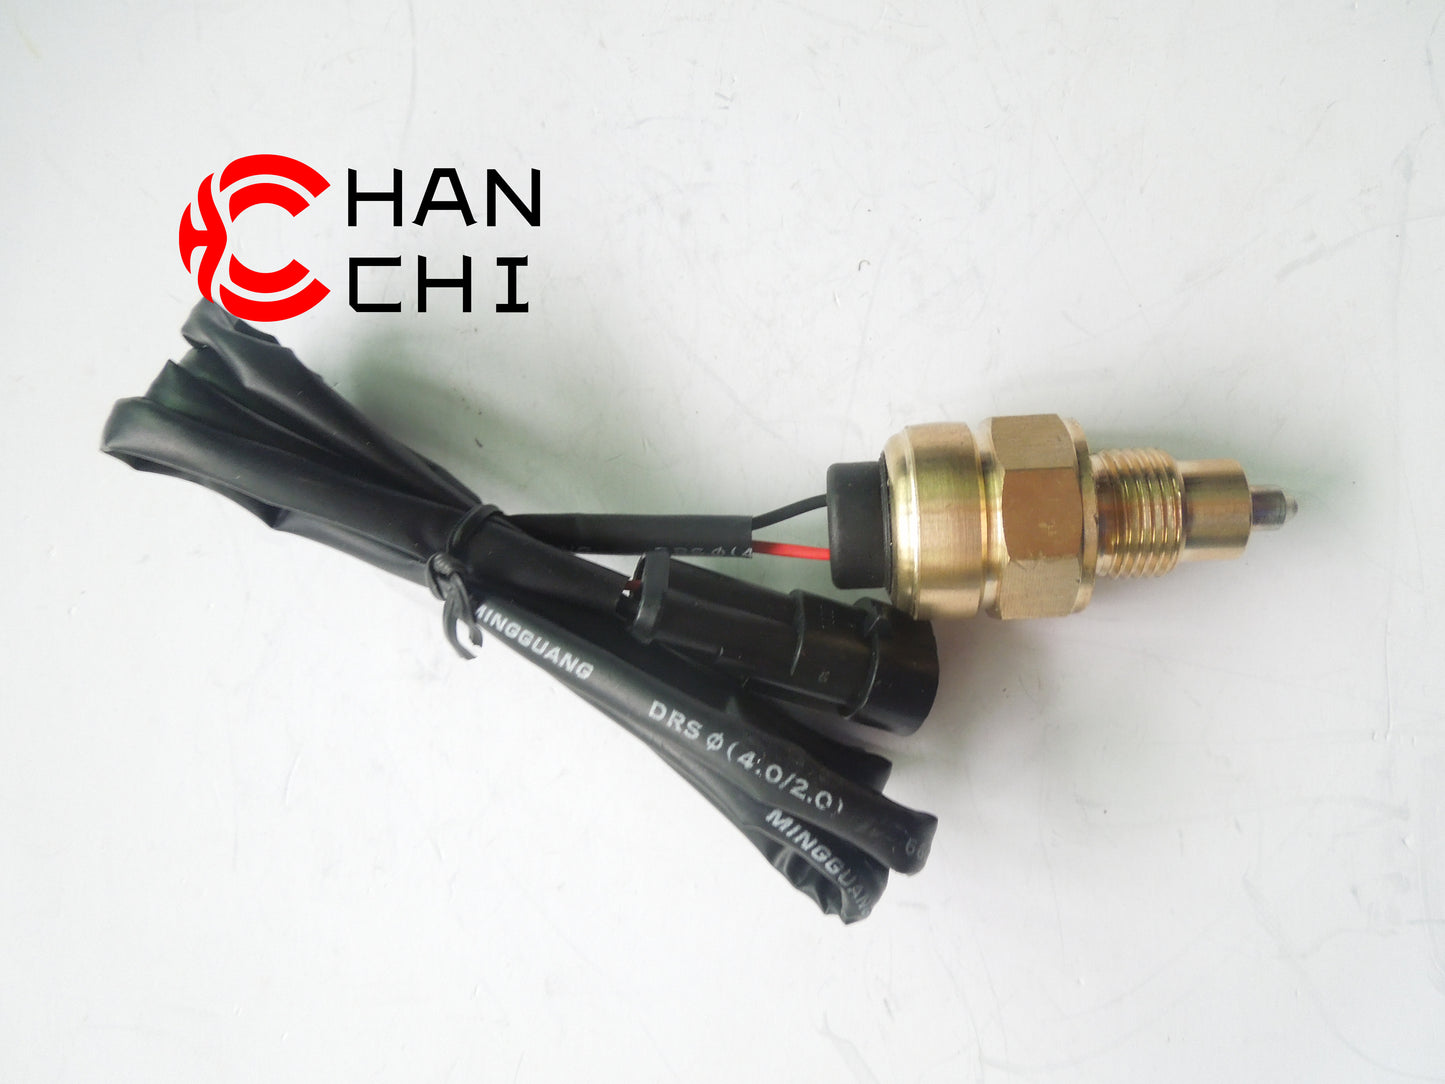 OEM: 0710207007-301 1701-04946 84210-1190Material: metalColor: black goldenOrigin: Made in ChinaWeight: 50gPacking List: 1* Reversing Light Switch More Service We can provide OEM Manufacturing service We can Be your one-step solution for Auto Parts We can provide technical scheme for you Feel Free to Contact Us, We will get back to you as soon as possible.